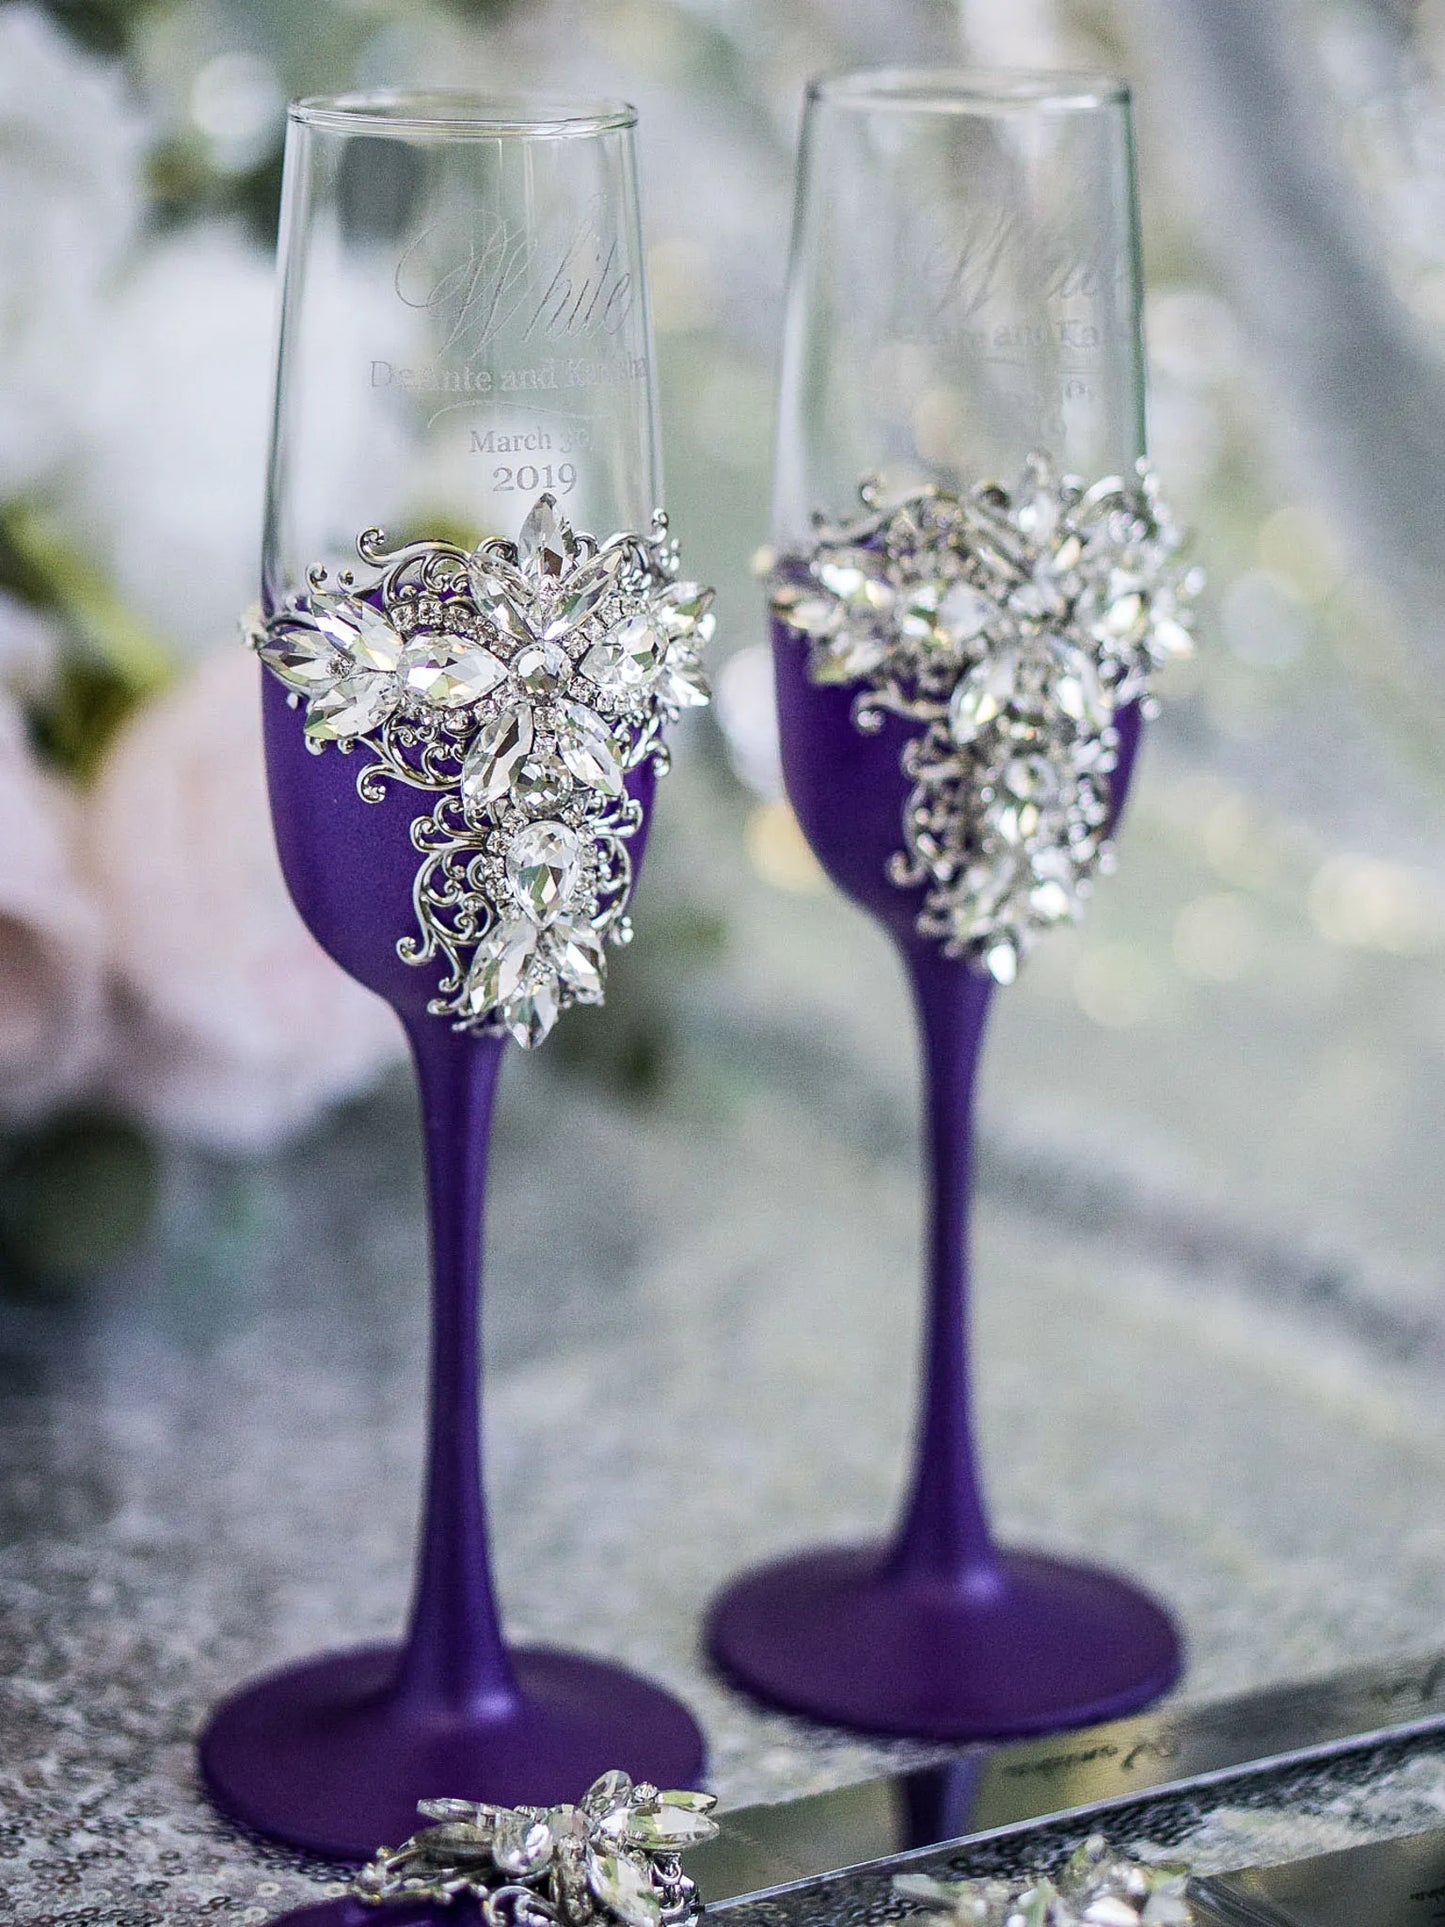 Silver and Plum Purple Personalized Crystals Decorative Champagne Glasses with Cake Serving Accessories